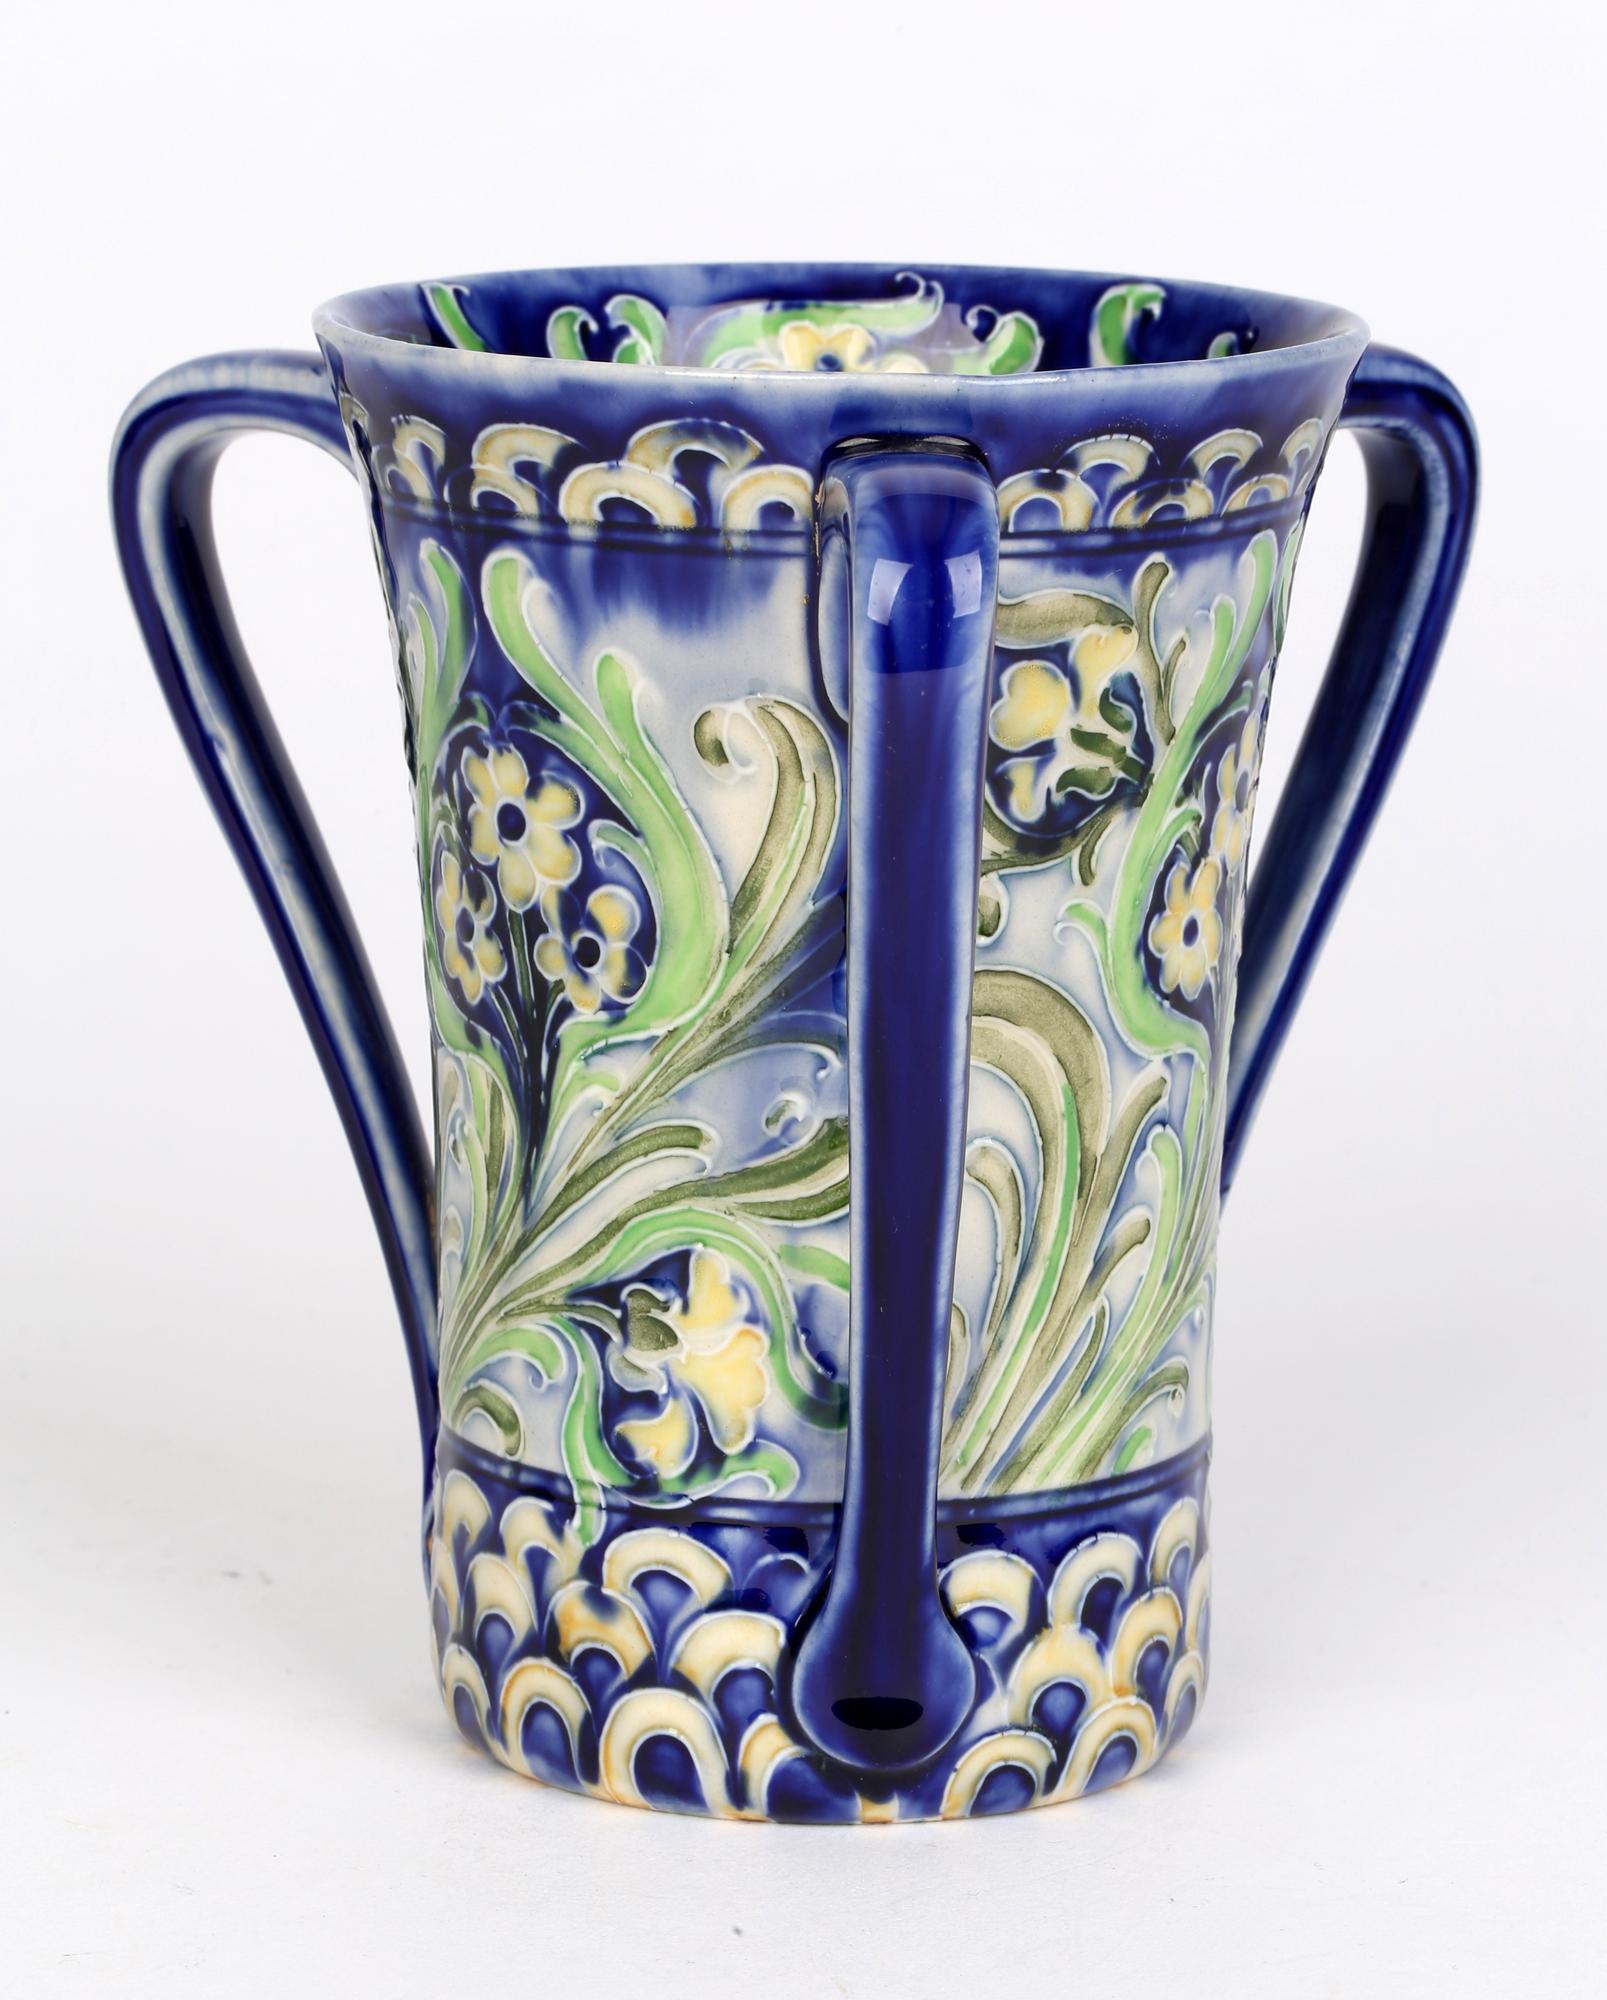 Art Nouveau James MacIntyre & Co. Florian Ware three-handled flared loving cup decorated with tube lined floral designs by William Moorcroft and dating from around 1900. William Moorcroft started out as a designer before becoming director of the art